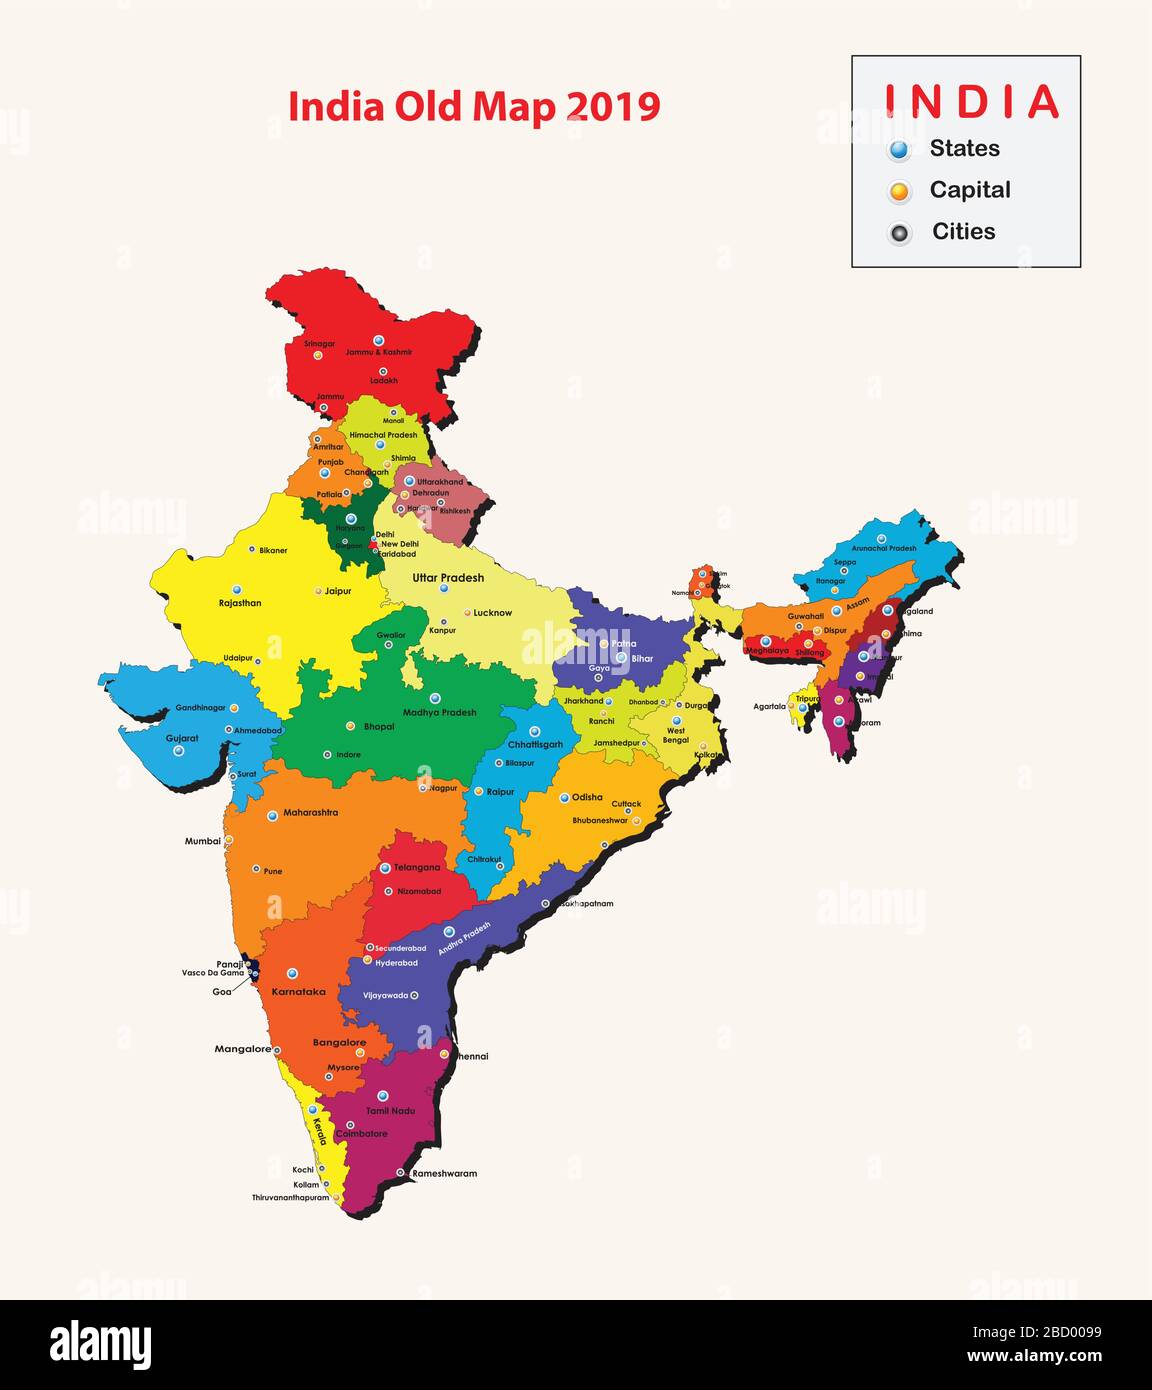 india map with states and capitals and cities States Capital And Cities In India Popular Cities In India india map with states and capitals and cities